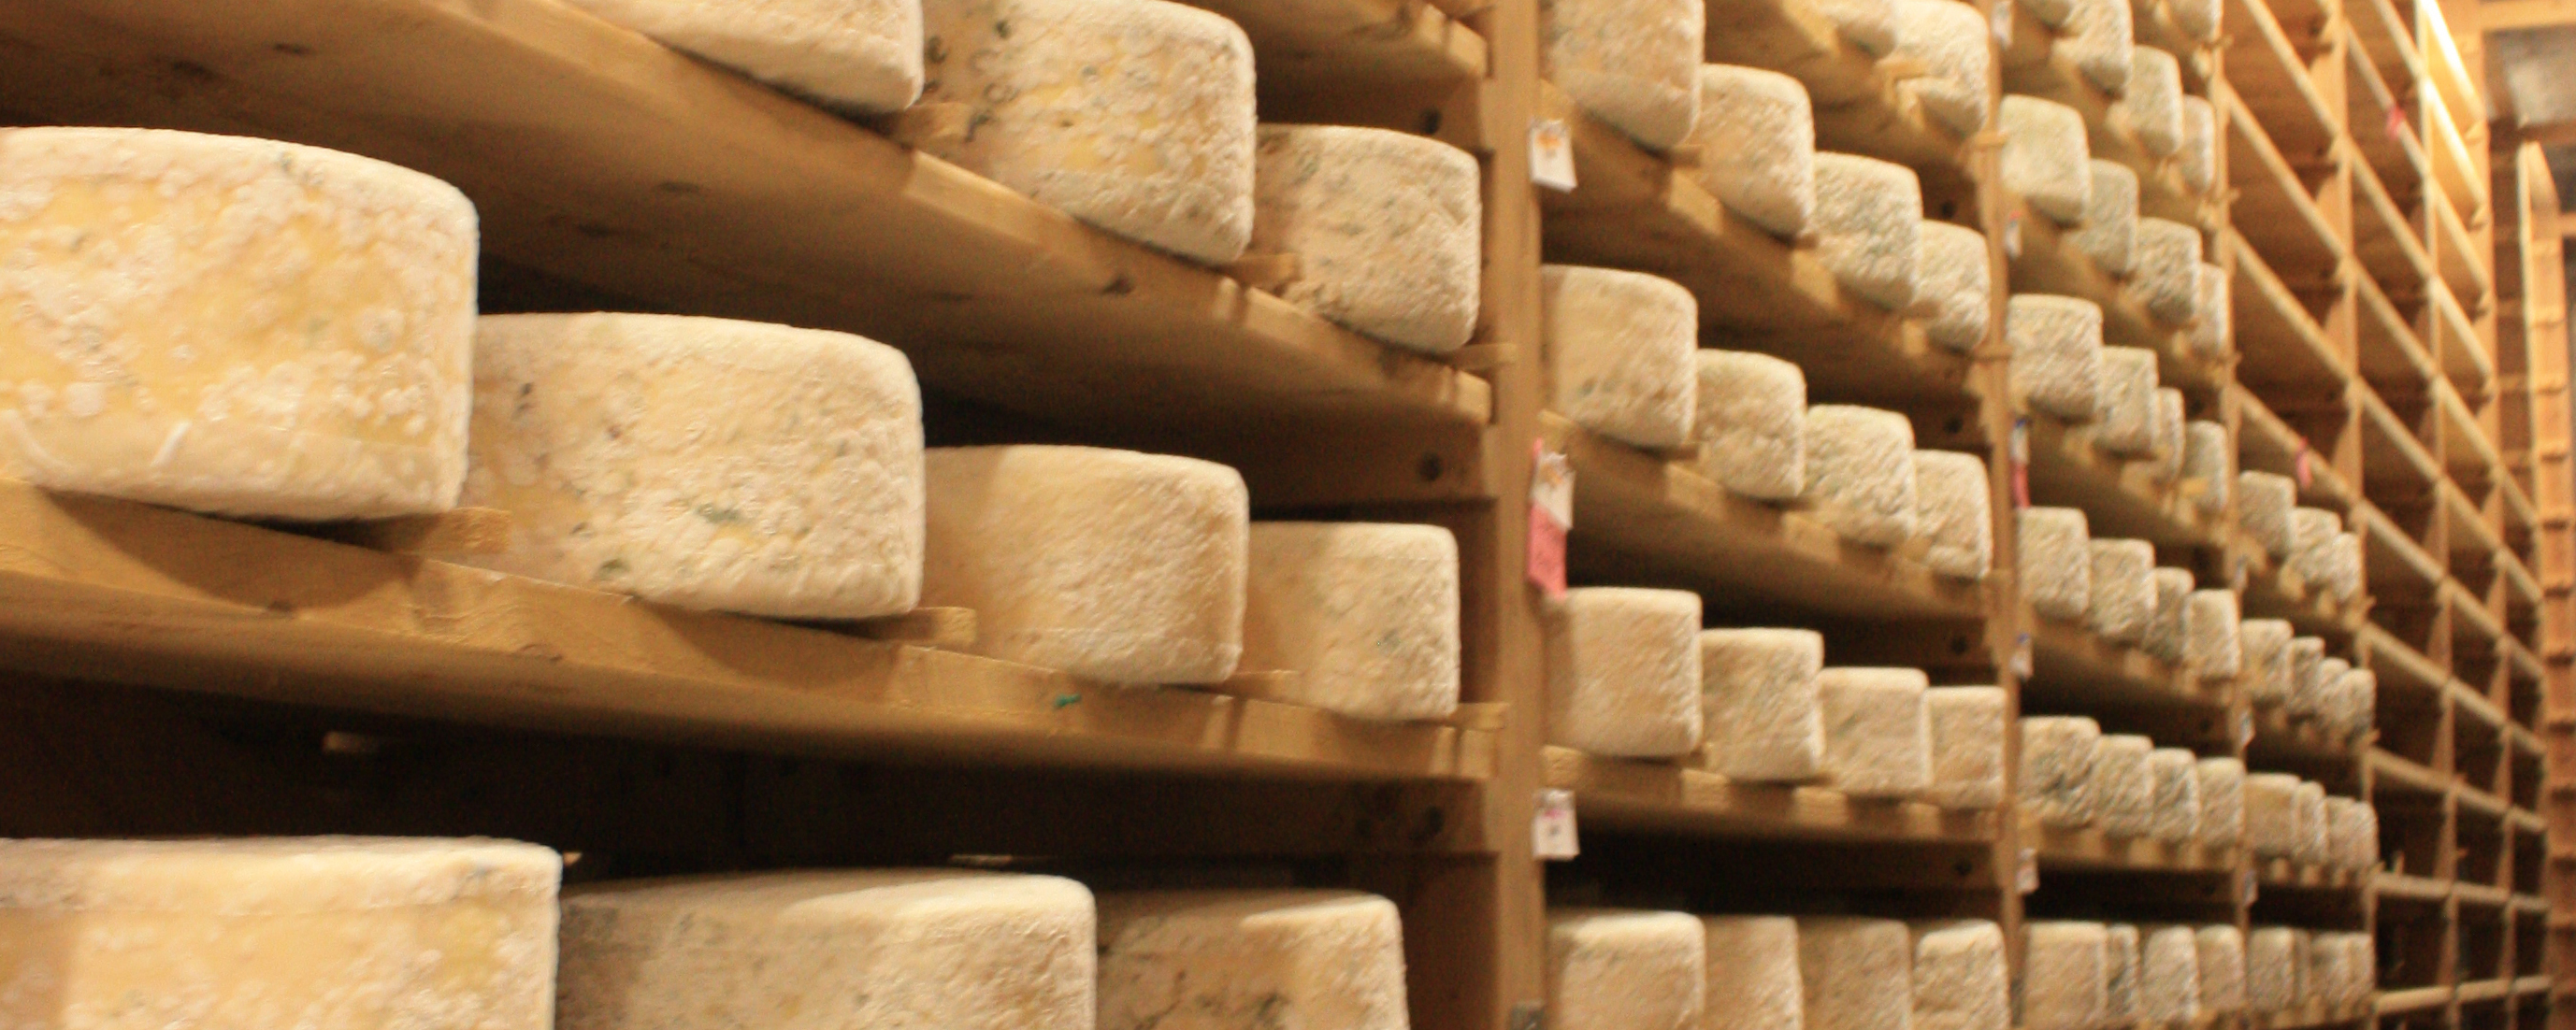 Vermont's Cheese Trail: The Best Cheese in Vermont - Travel Like a Local:  Vermont